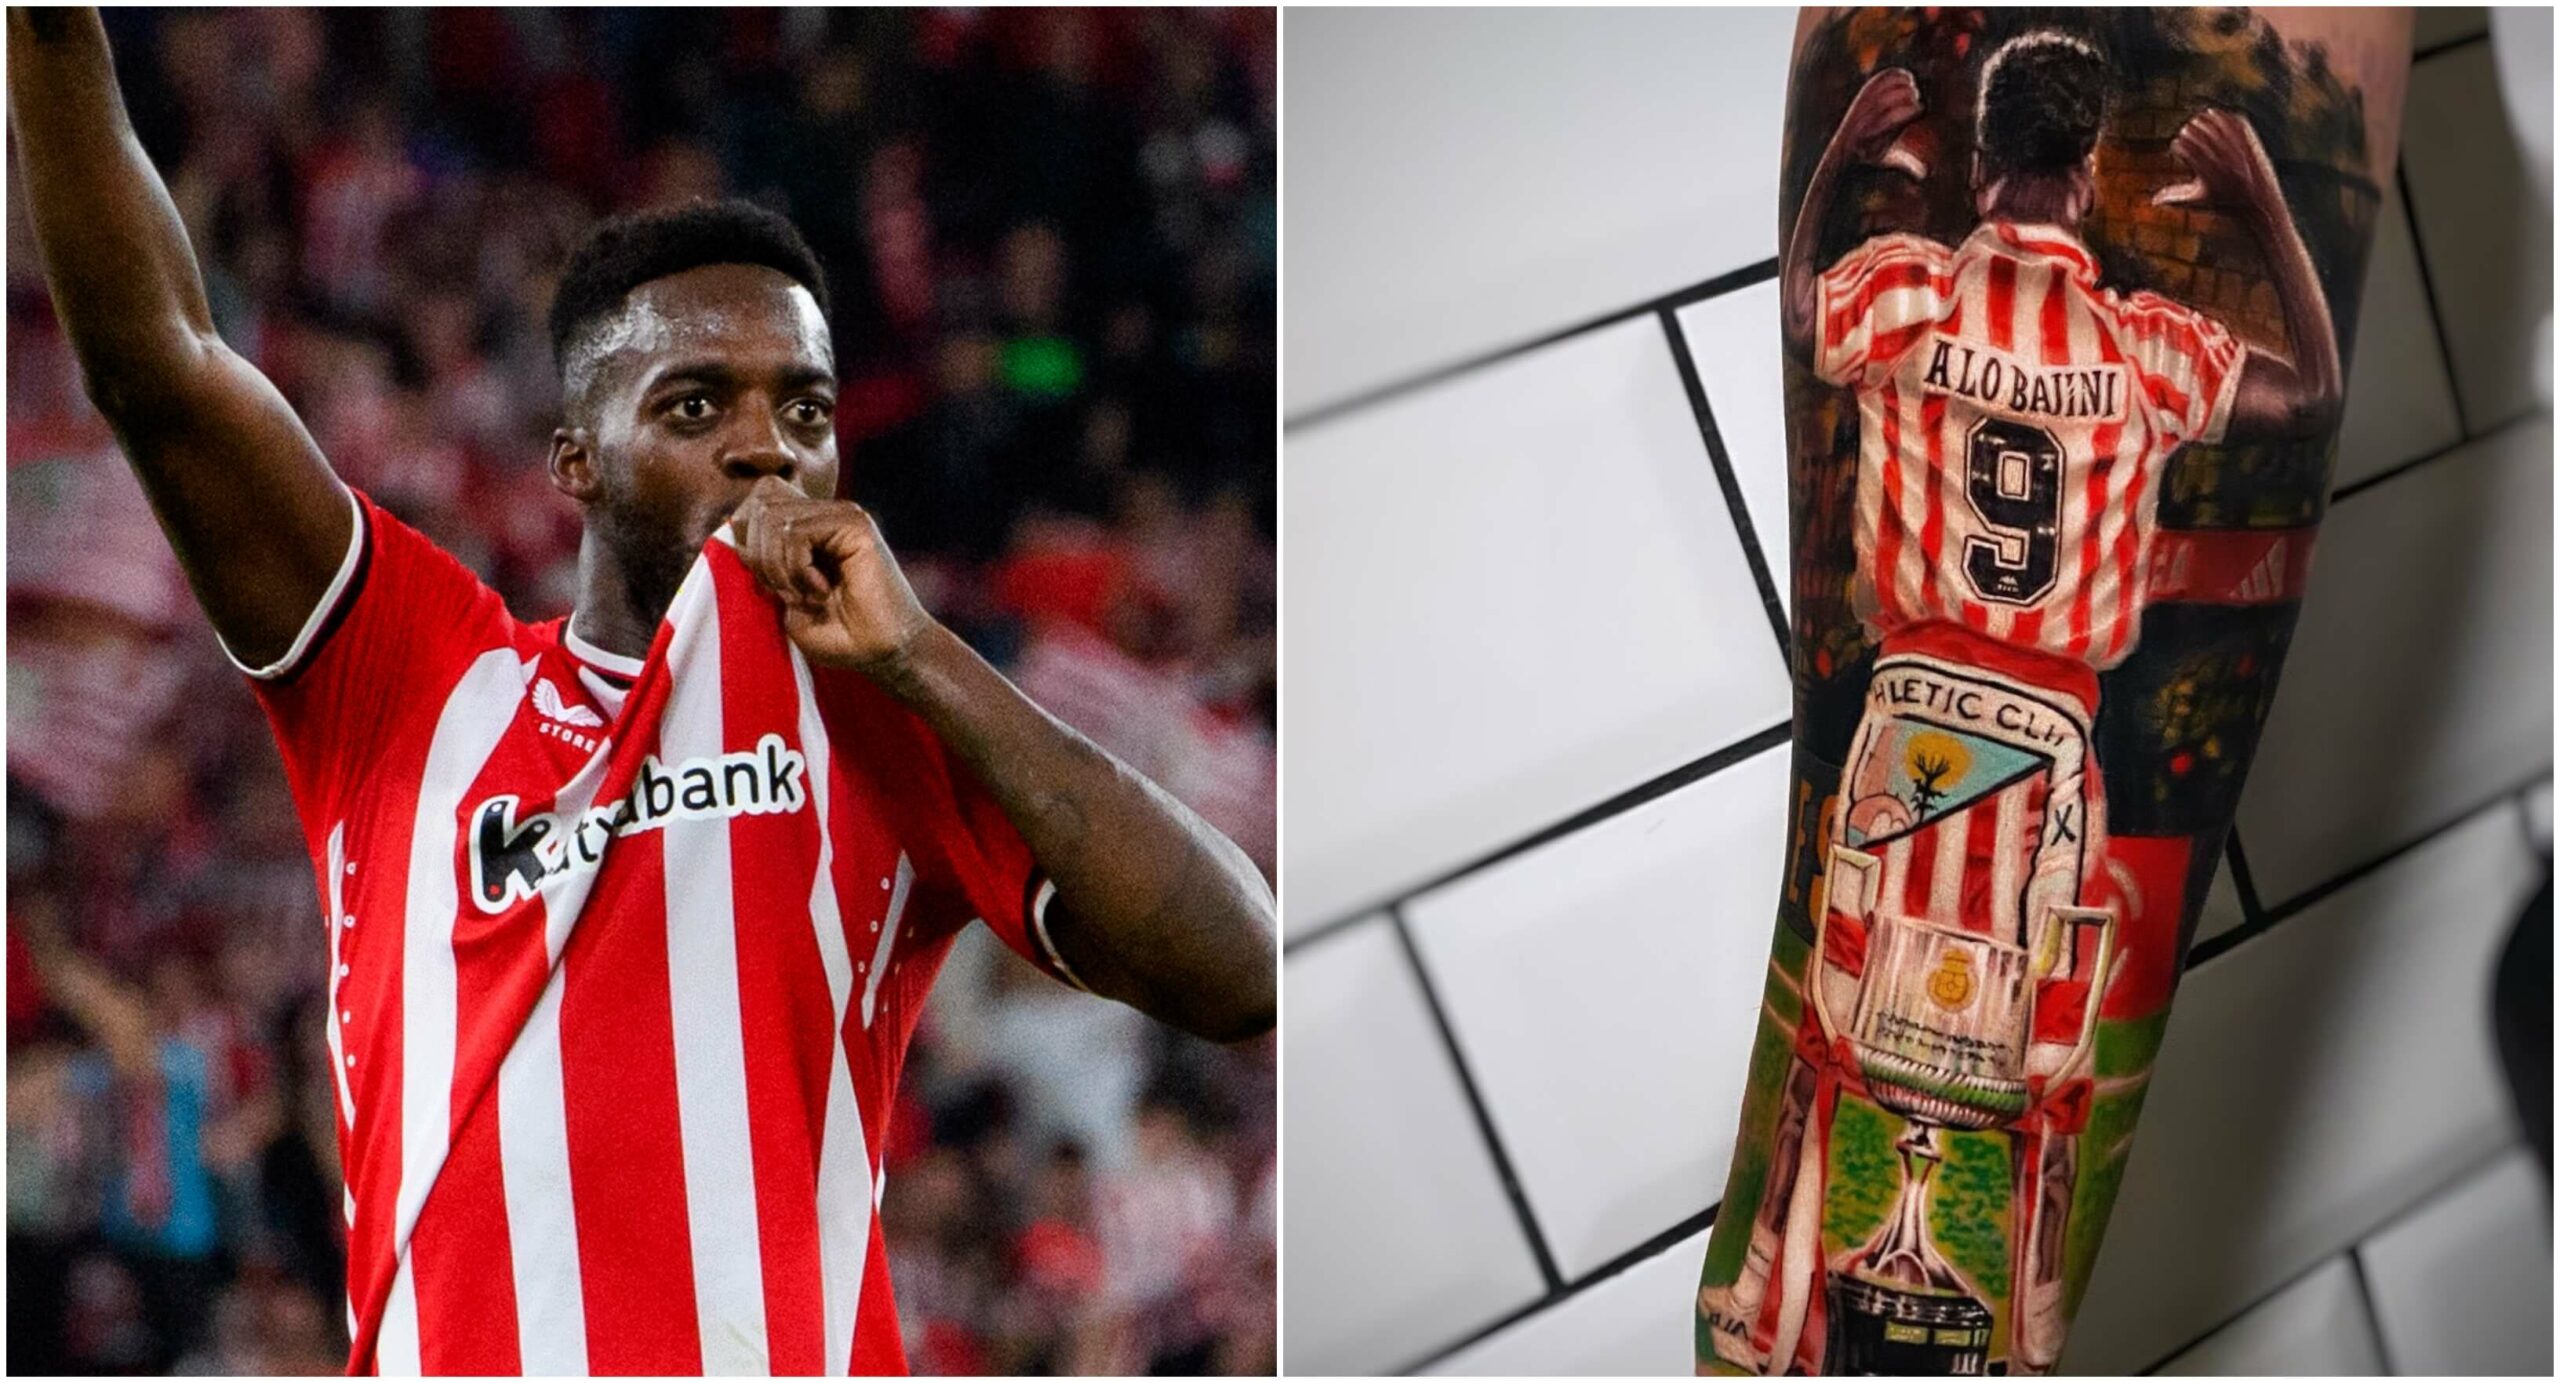 ‘Incredibly well done’ - Inaki Williams praises Athletic Club fan for tattooing him on his skin